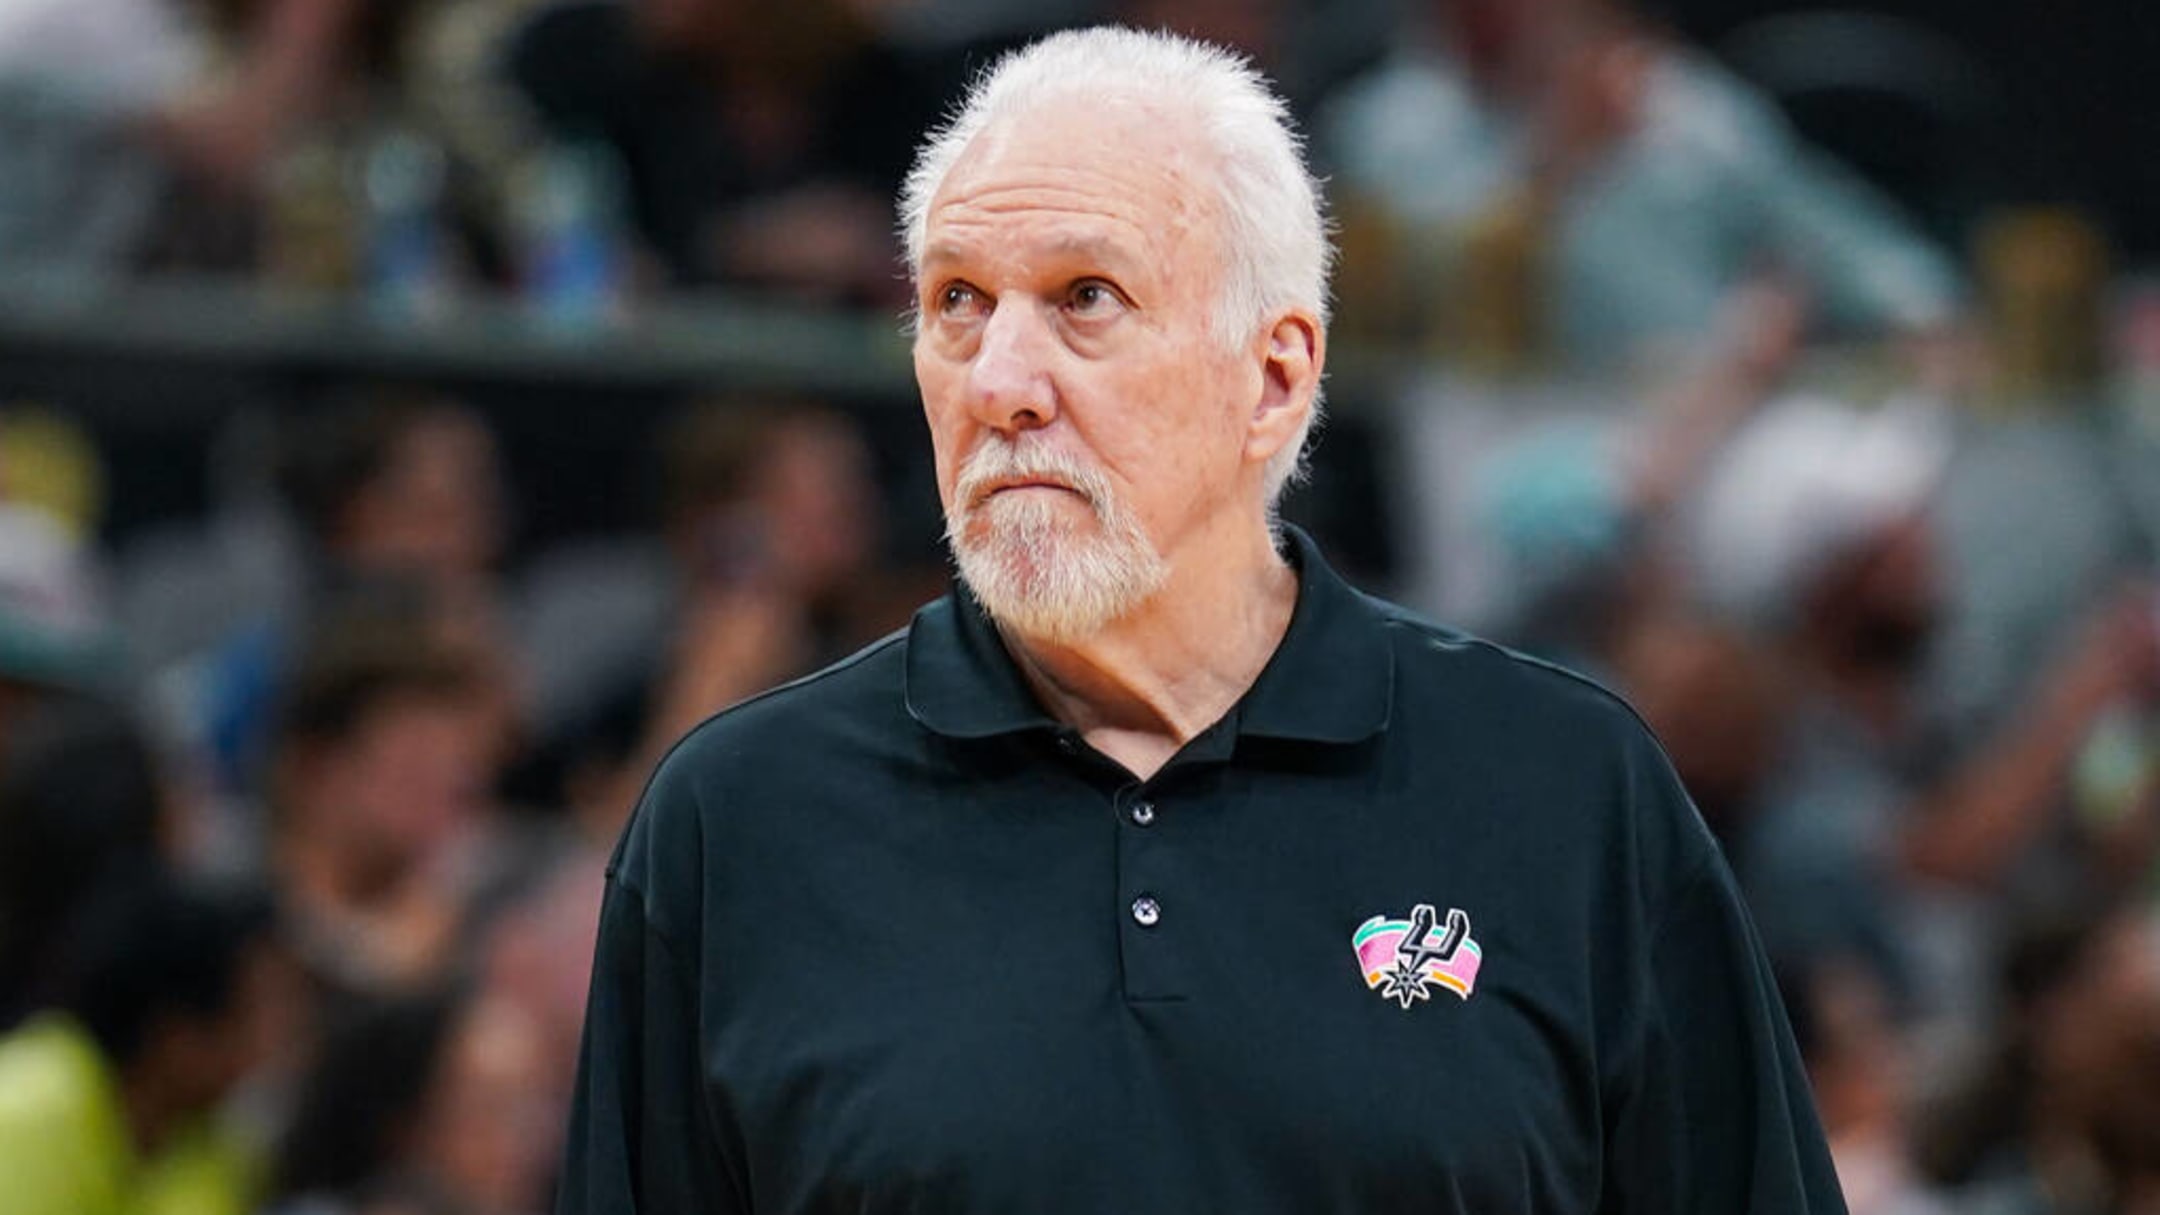 Dejounte Murray gives another update on Popovich